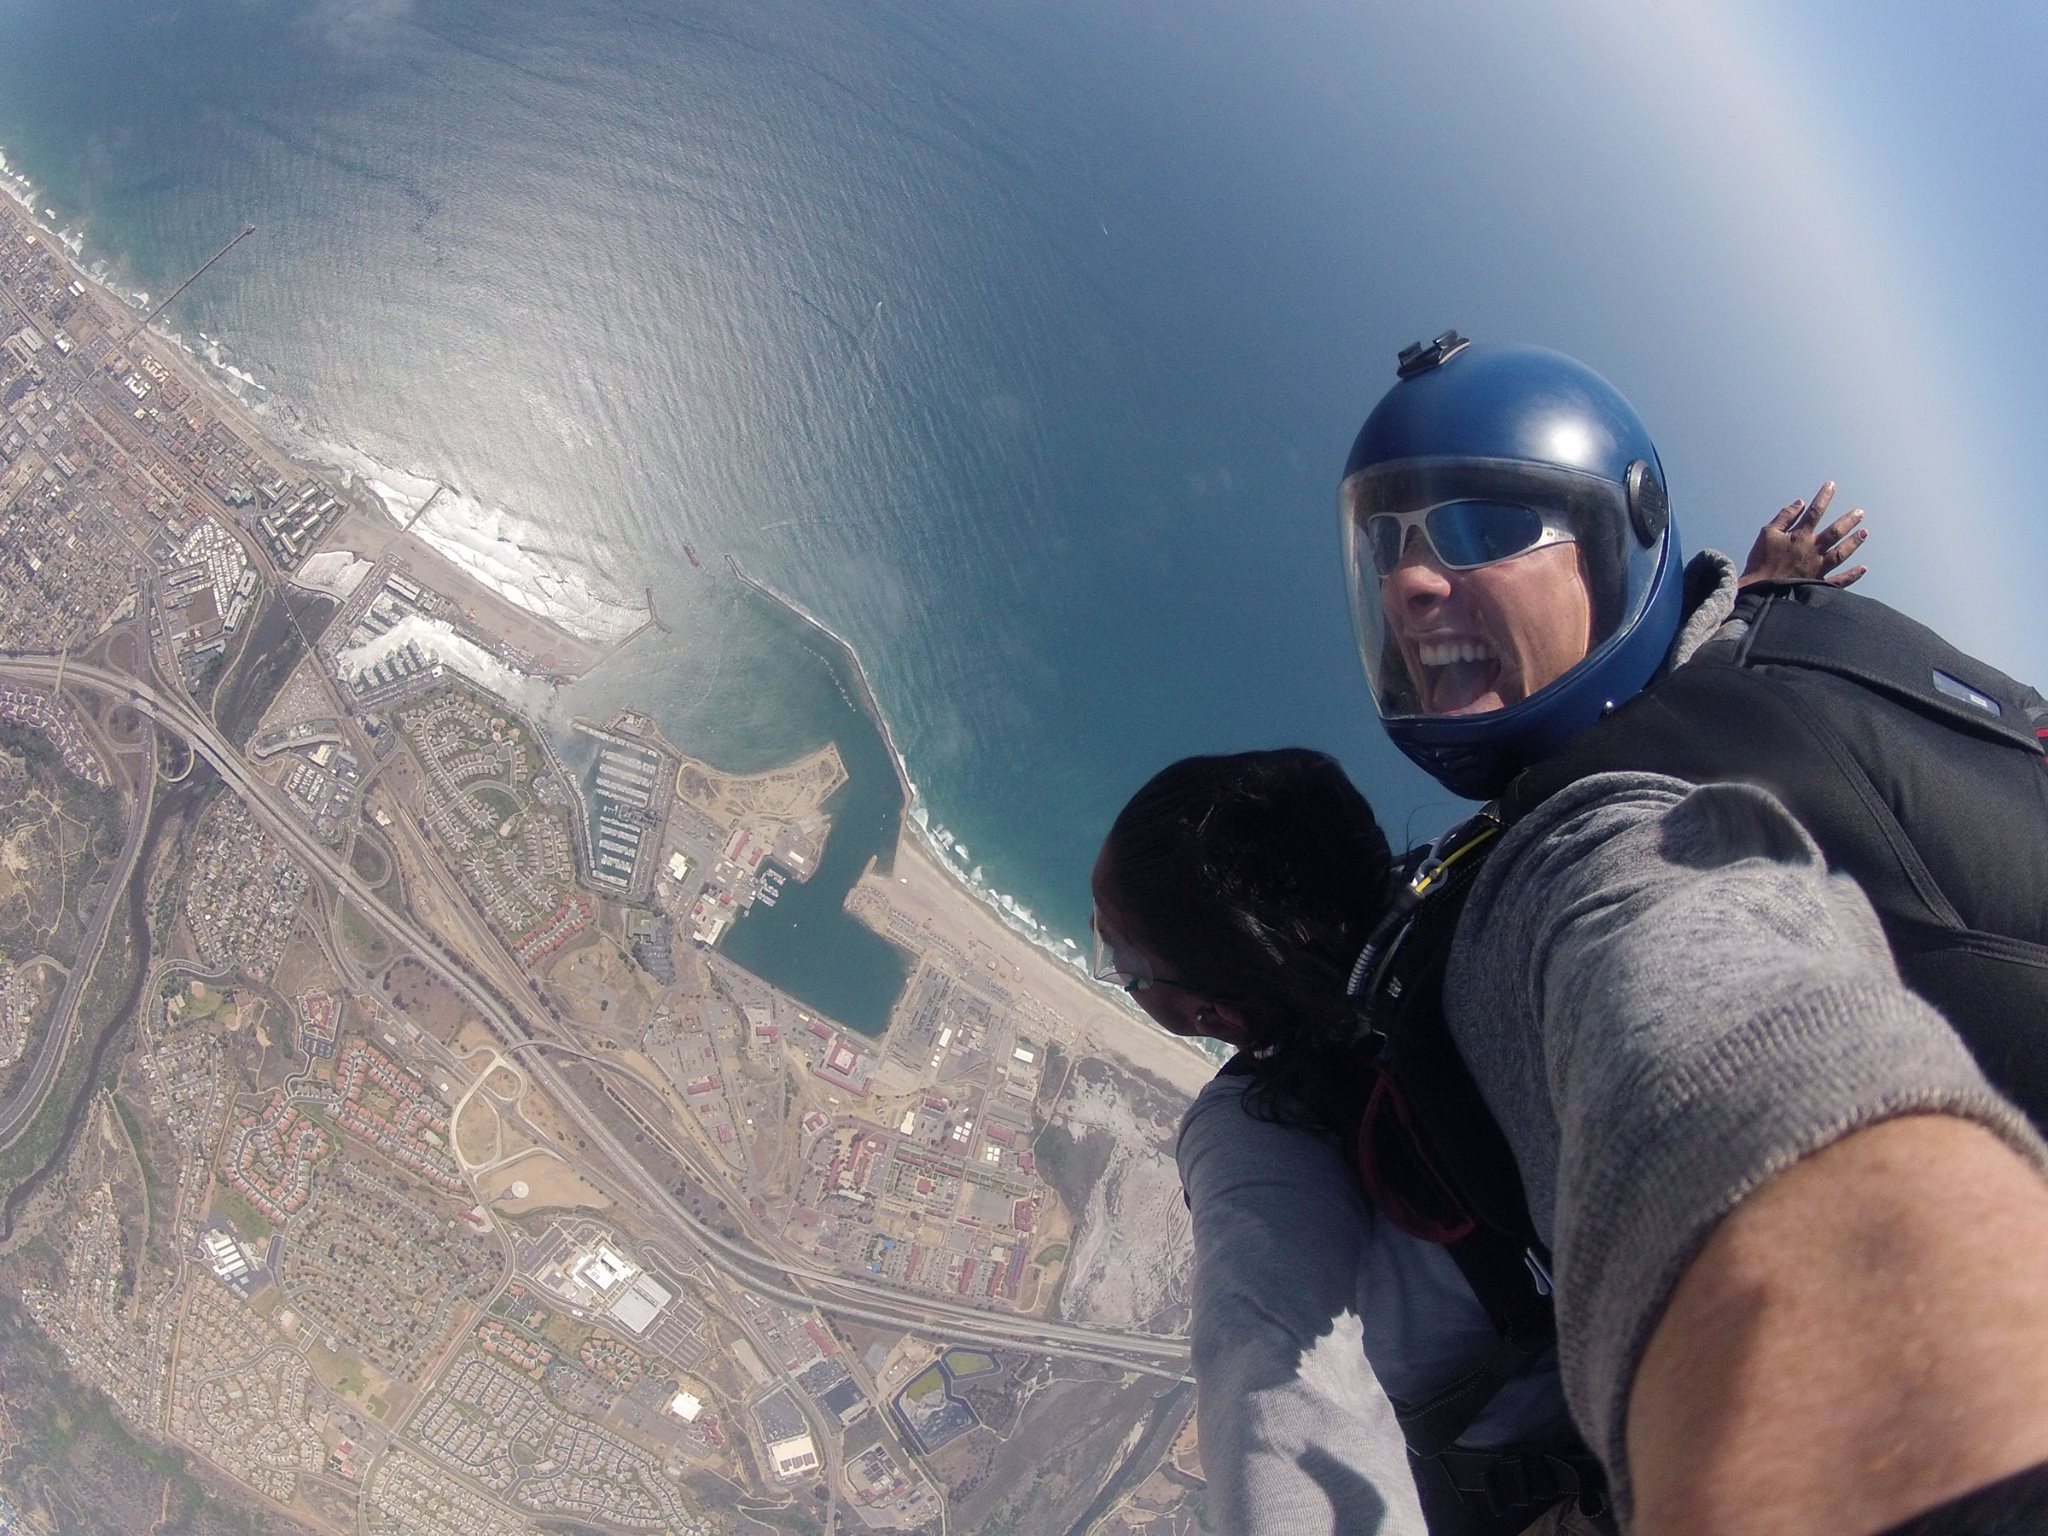 Skydiving in San Diego Strap on Your 'Chute and Get Ready!